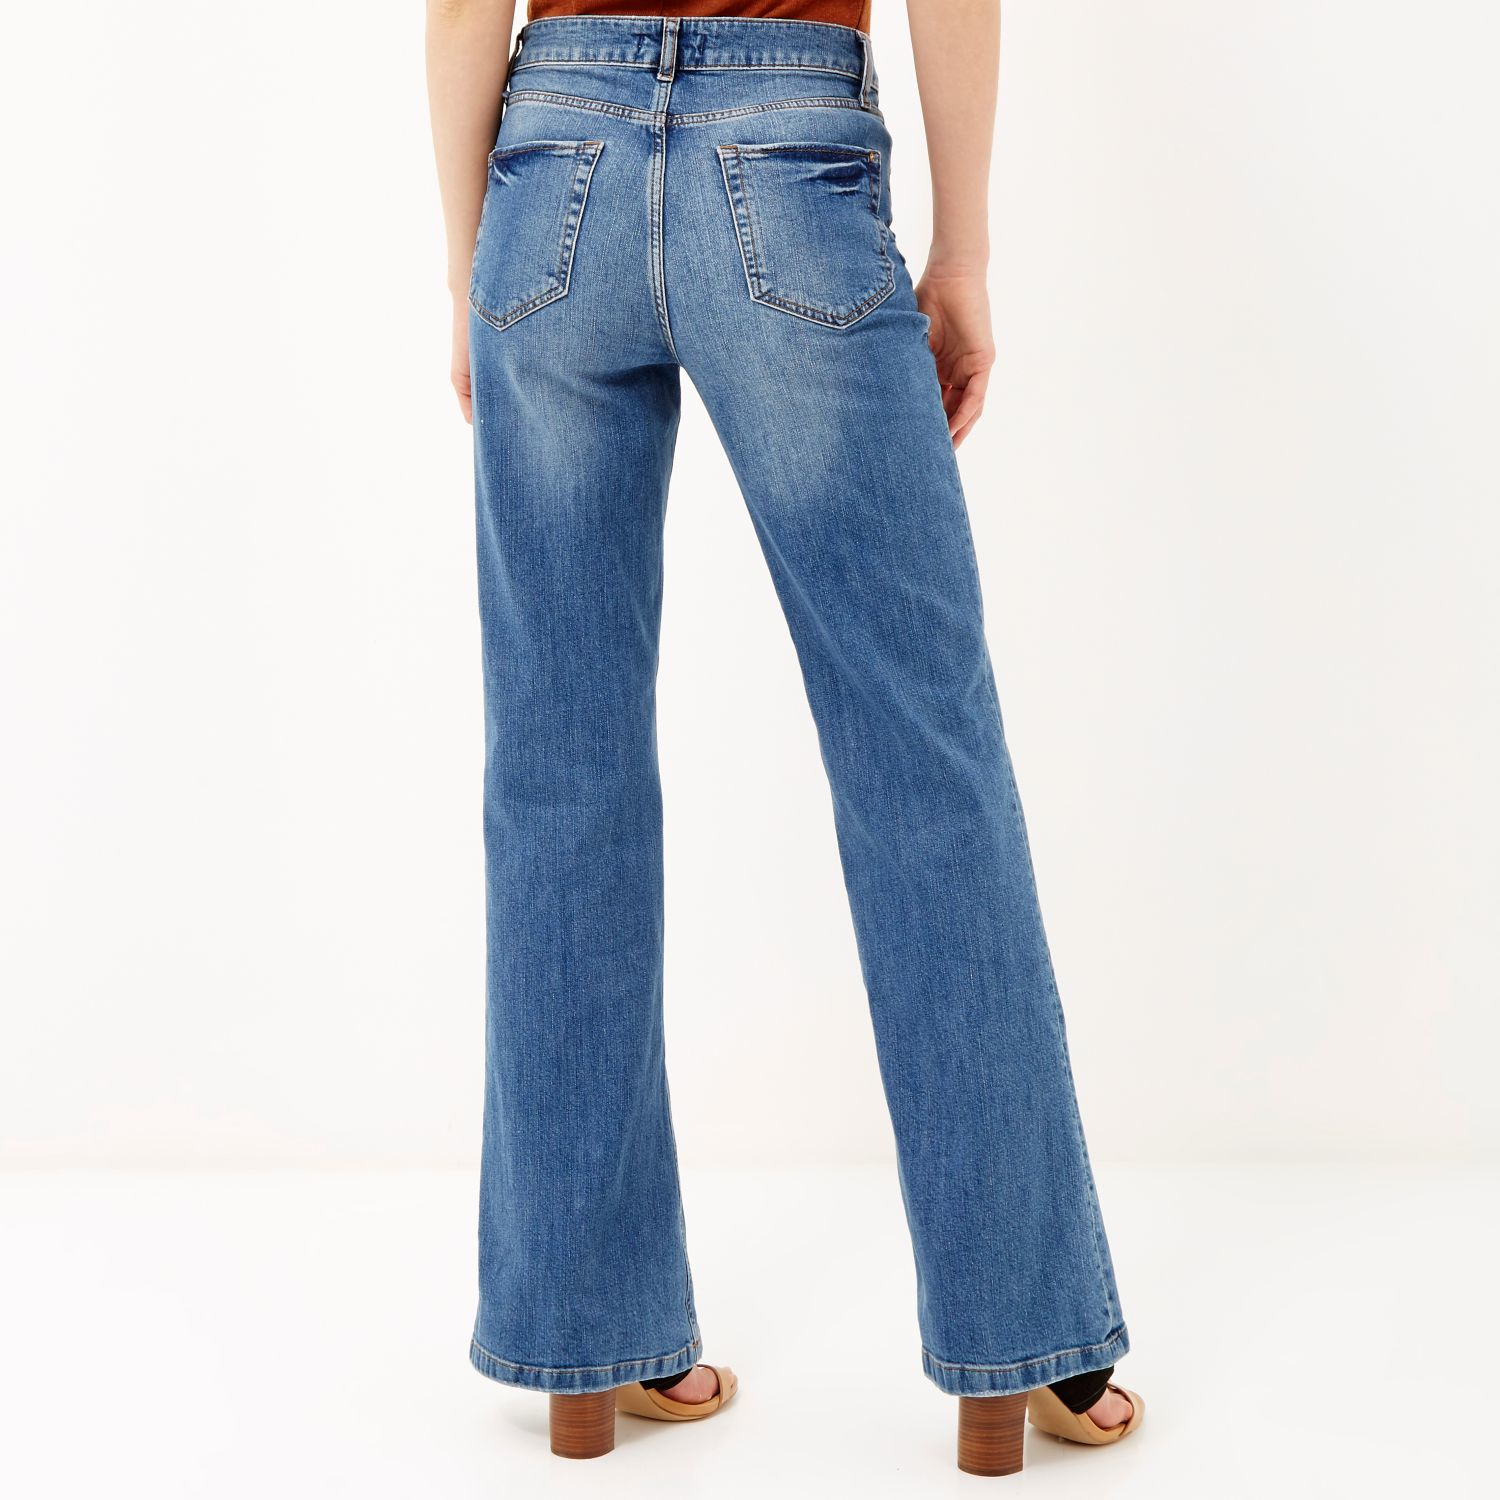 Lyst - River Island Mid Wash Wide Leg Flare Jeans in Blue